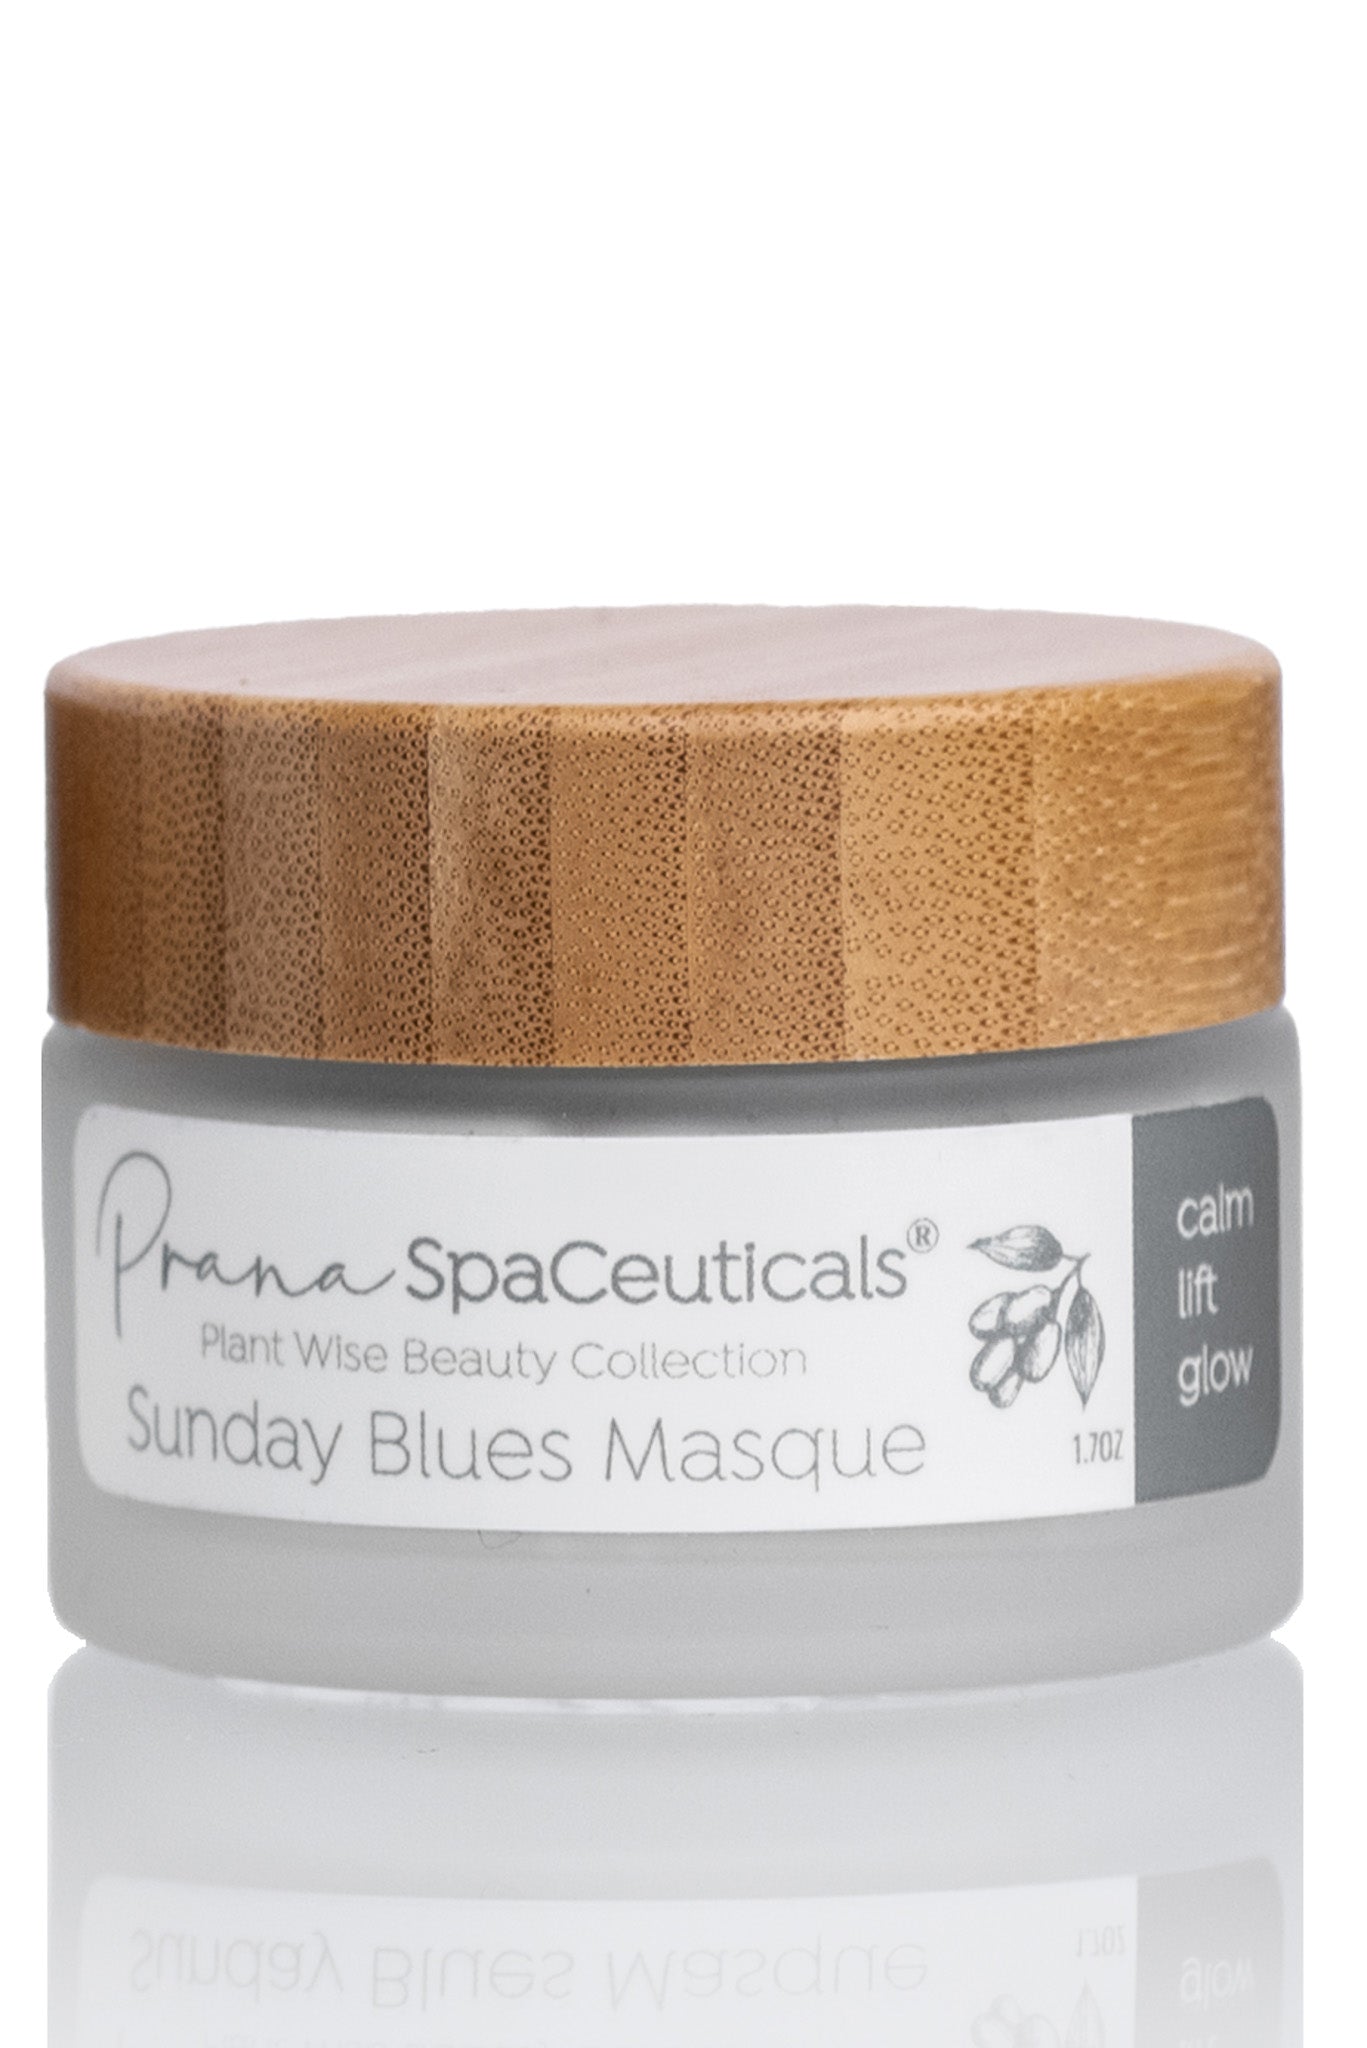 PLANT WISE BEAUTY COLLECTION: Sunday Blues Masque